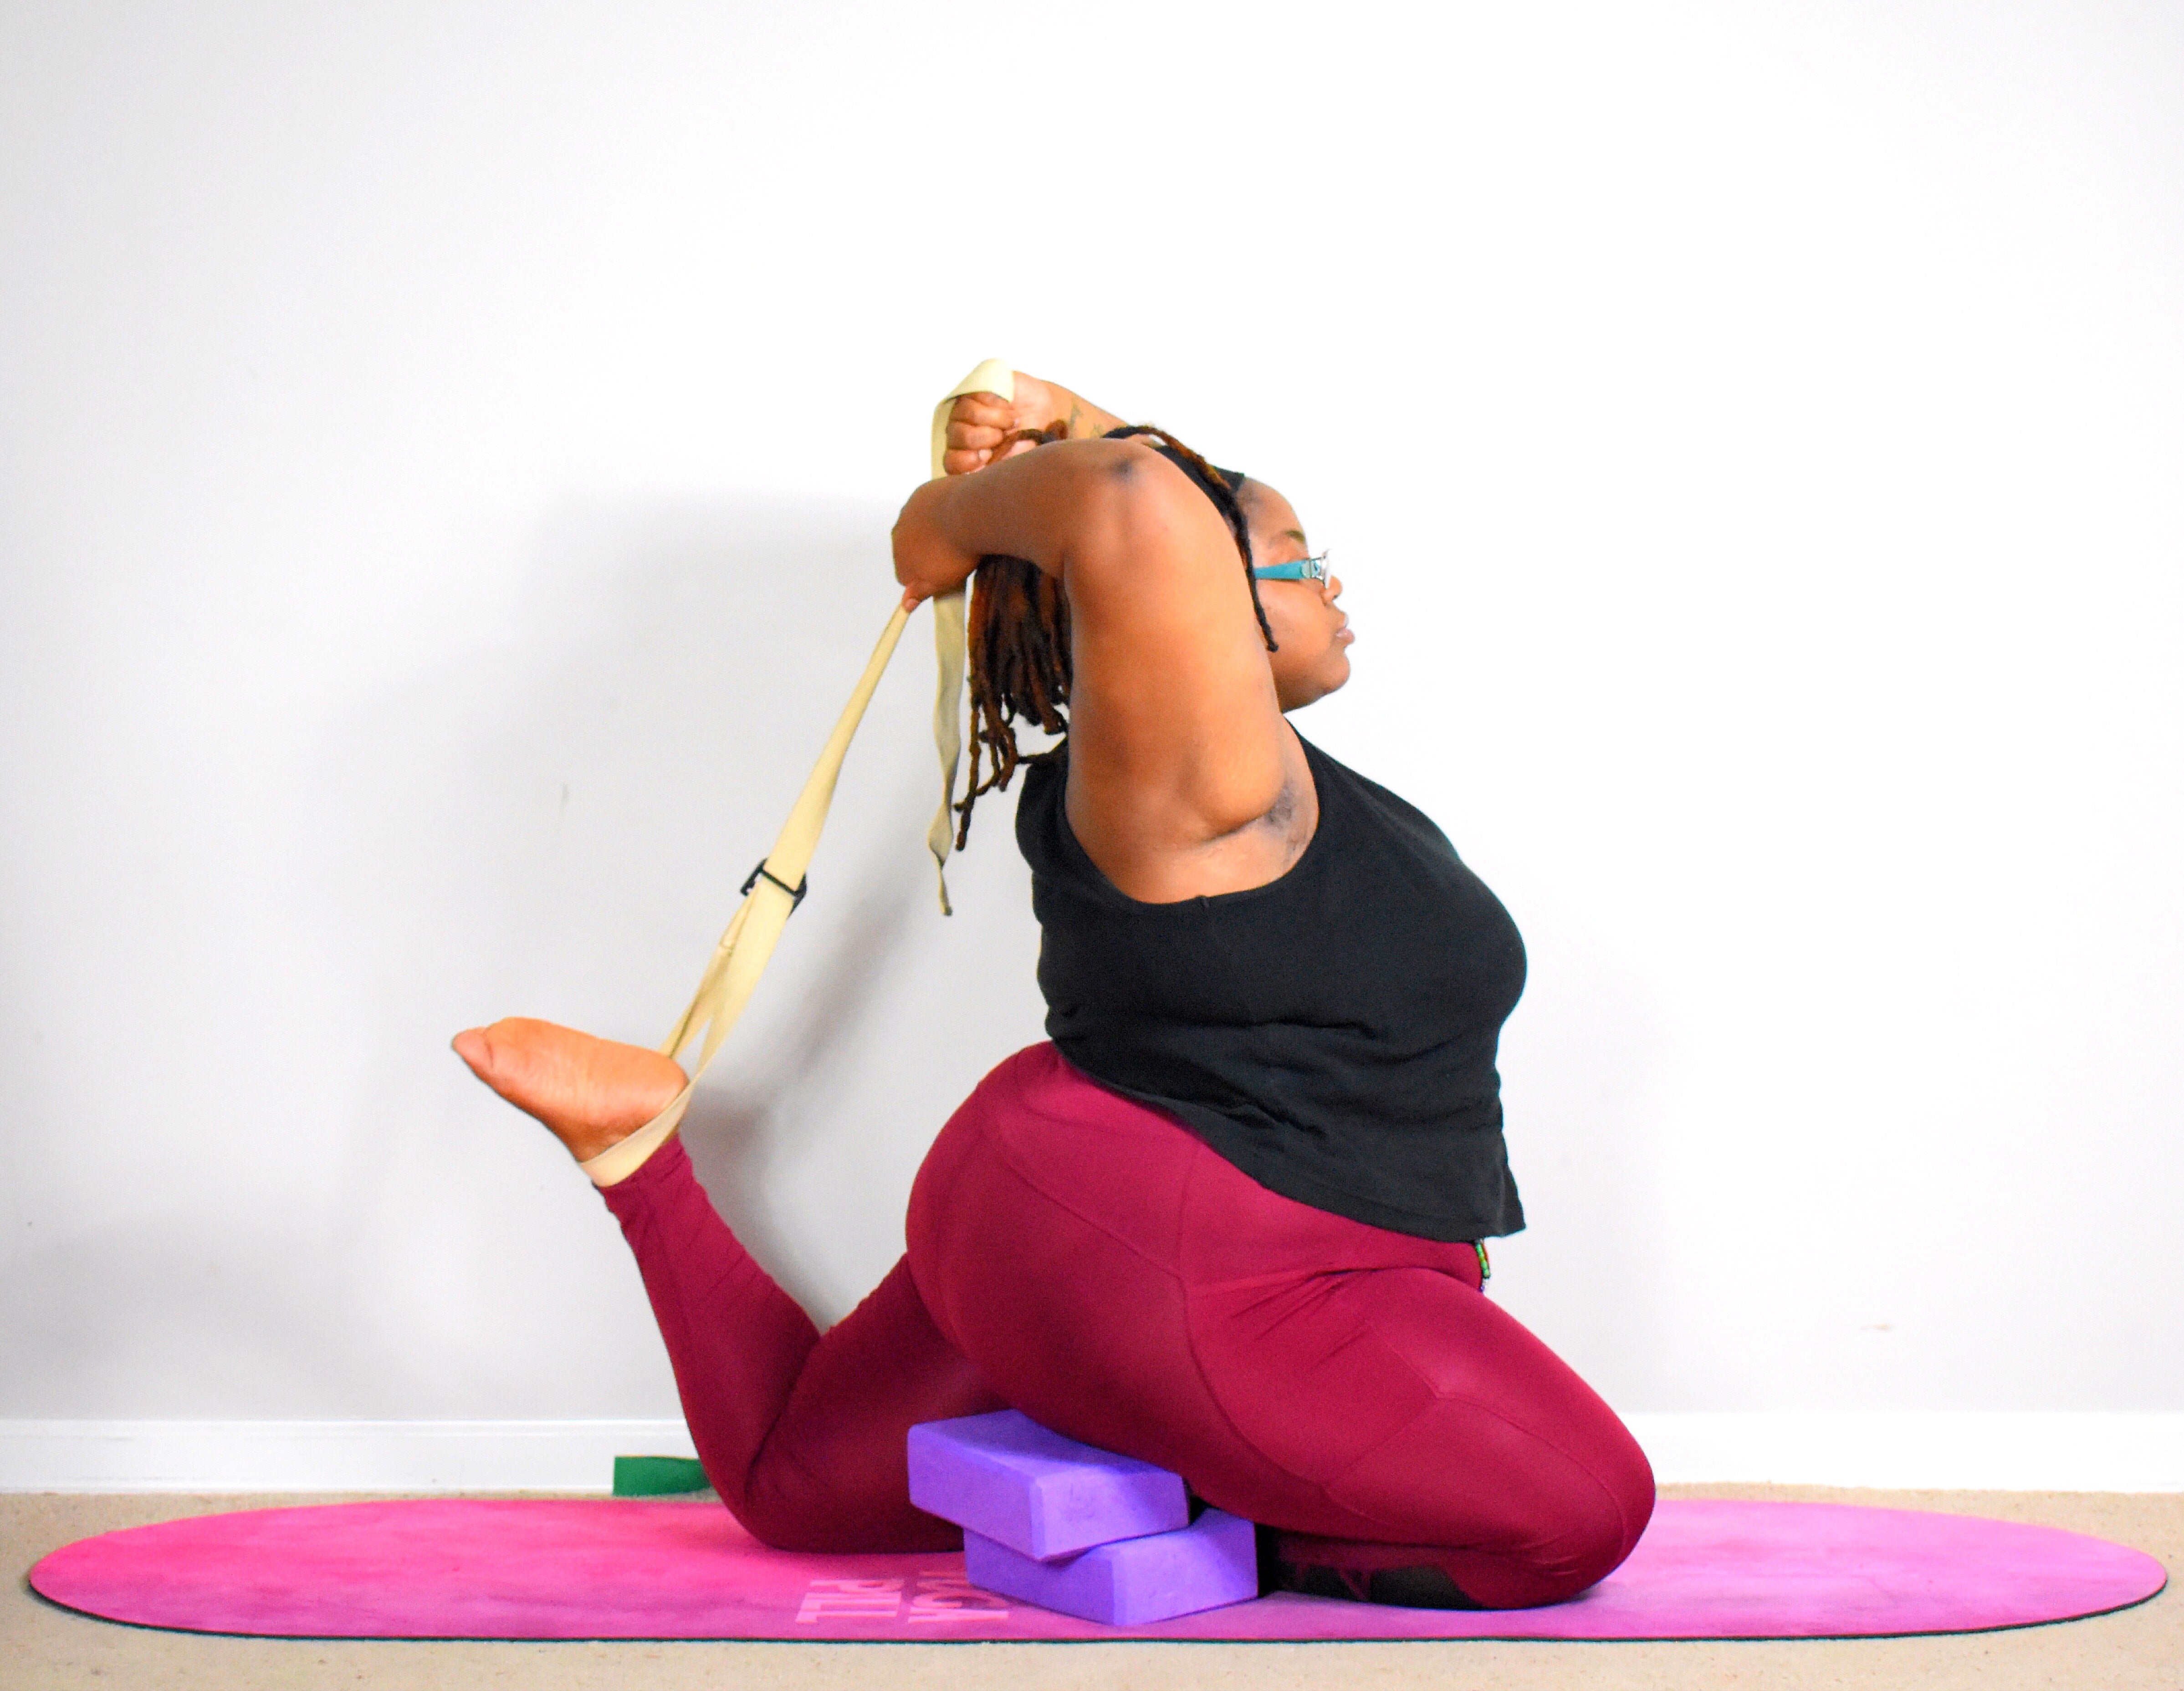 Yoga Props: All About Mats, Bricks, Straps, and More | Everyday Health